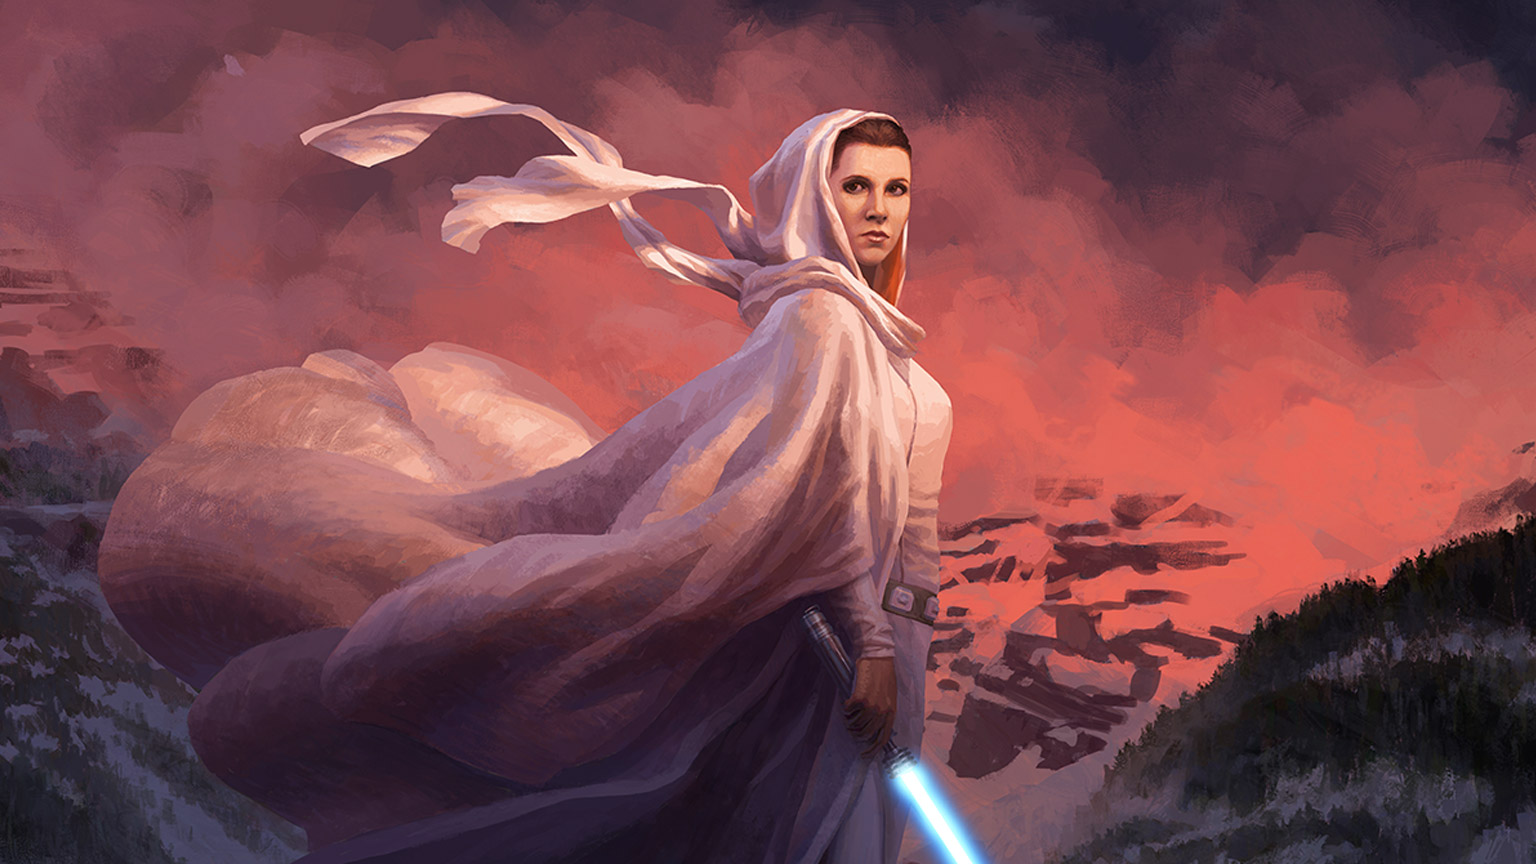 Leia Ignites Her Lightsaber in a Dreamlike New Print from Acme Archives – Exclusive Reveal